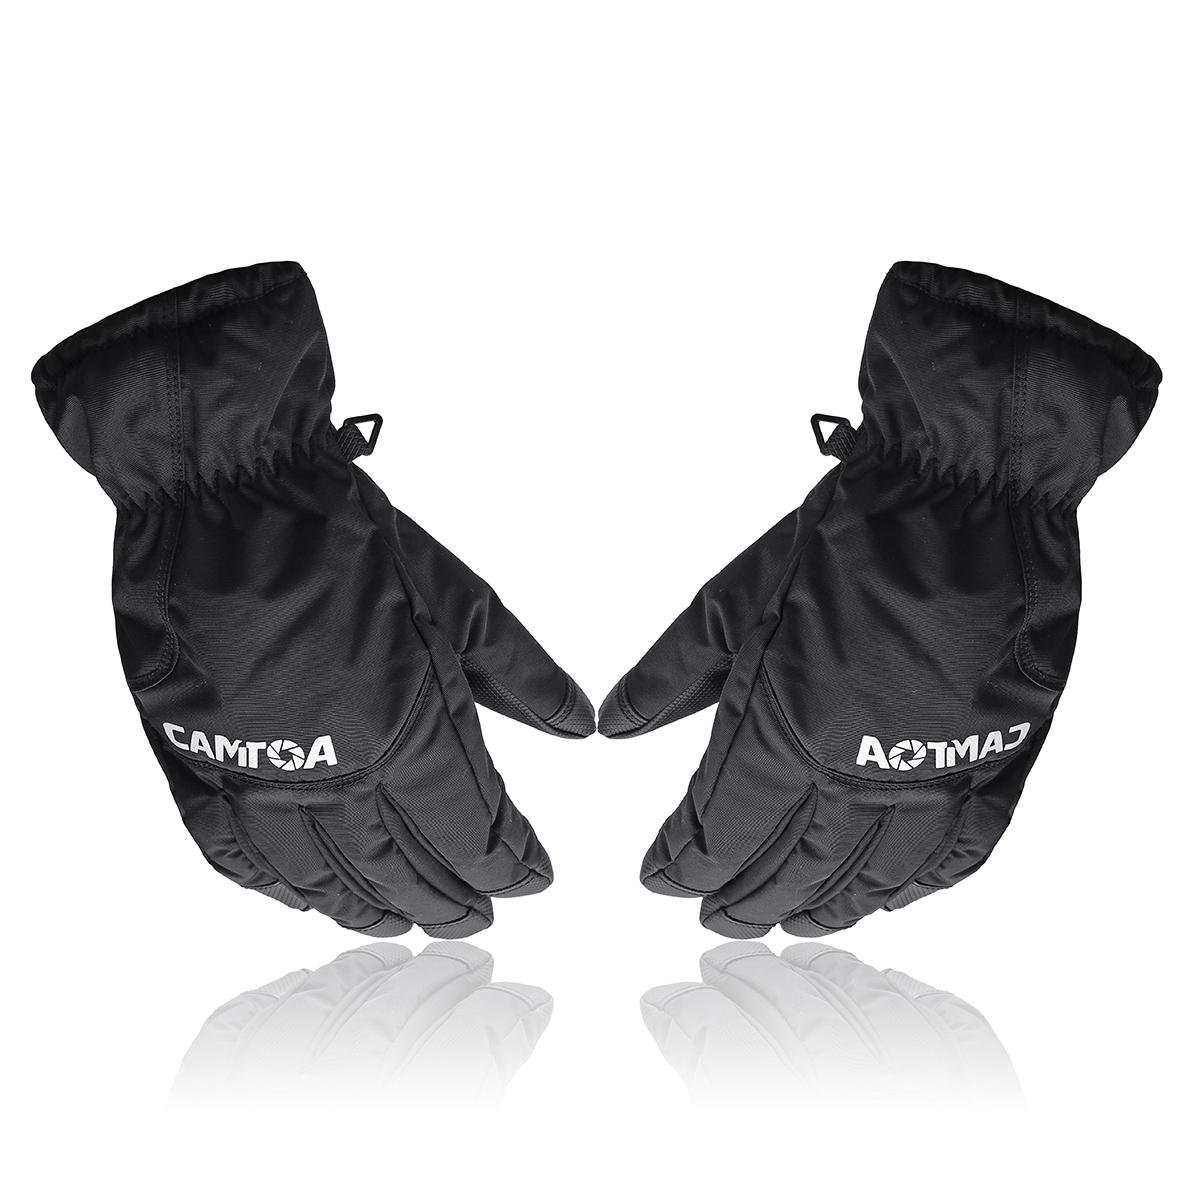 CAMTOA Winter Skiing Gloves 3M Thinsulate Warm Waterproof Breathable Snow Gloves for Men and Women